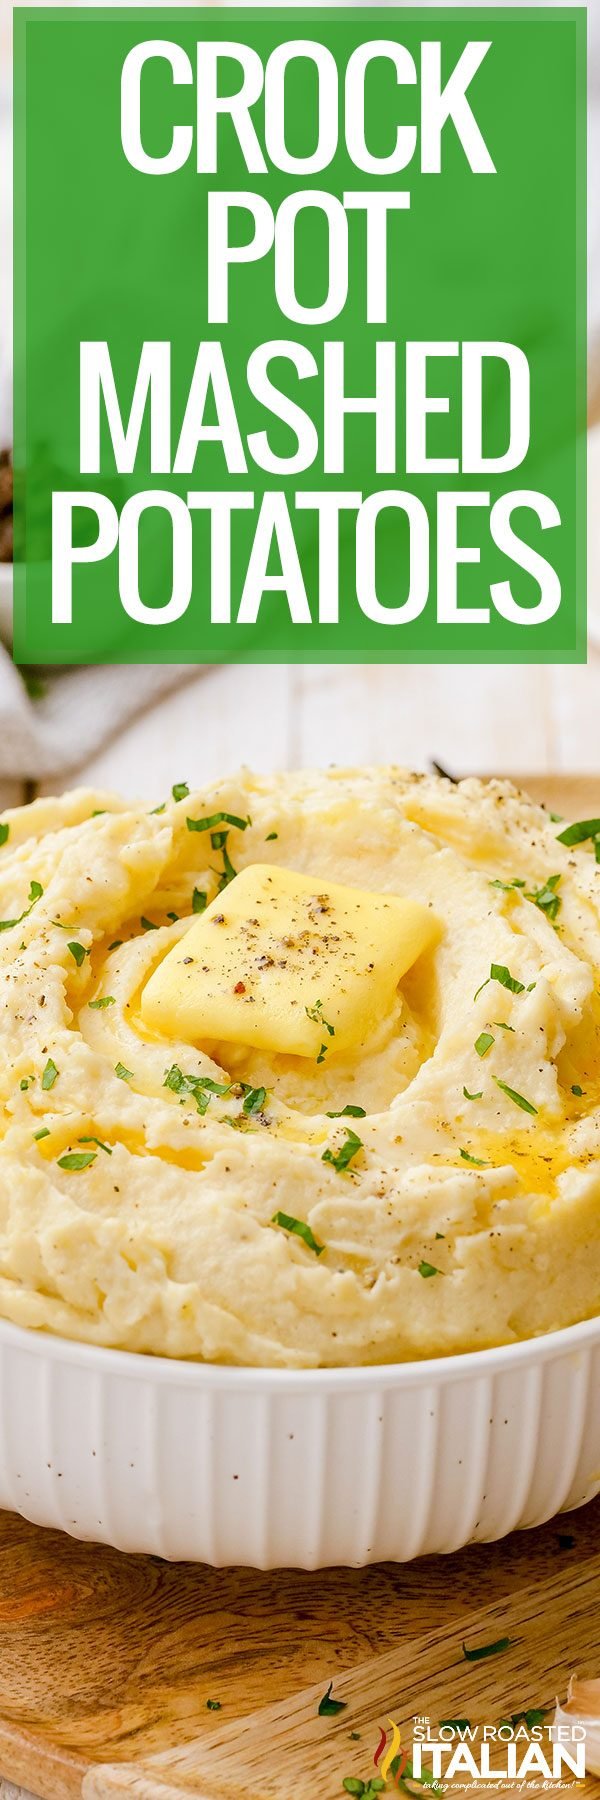 titled image (and shown): easy crock pot mashed potatoes recipe